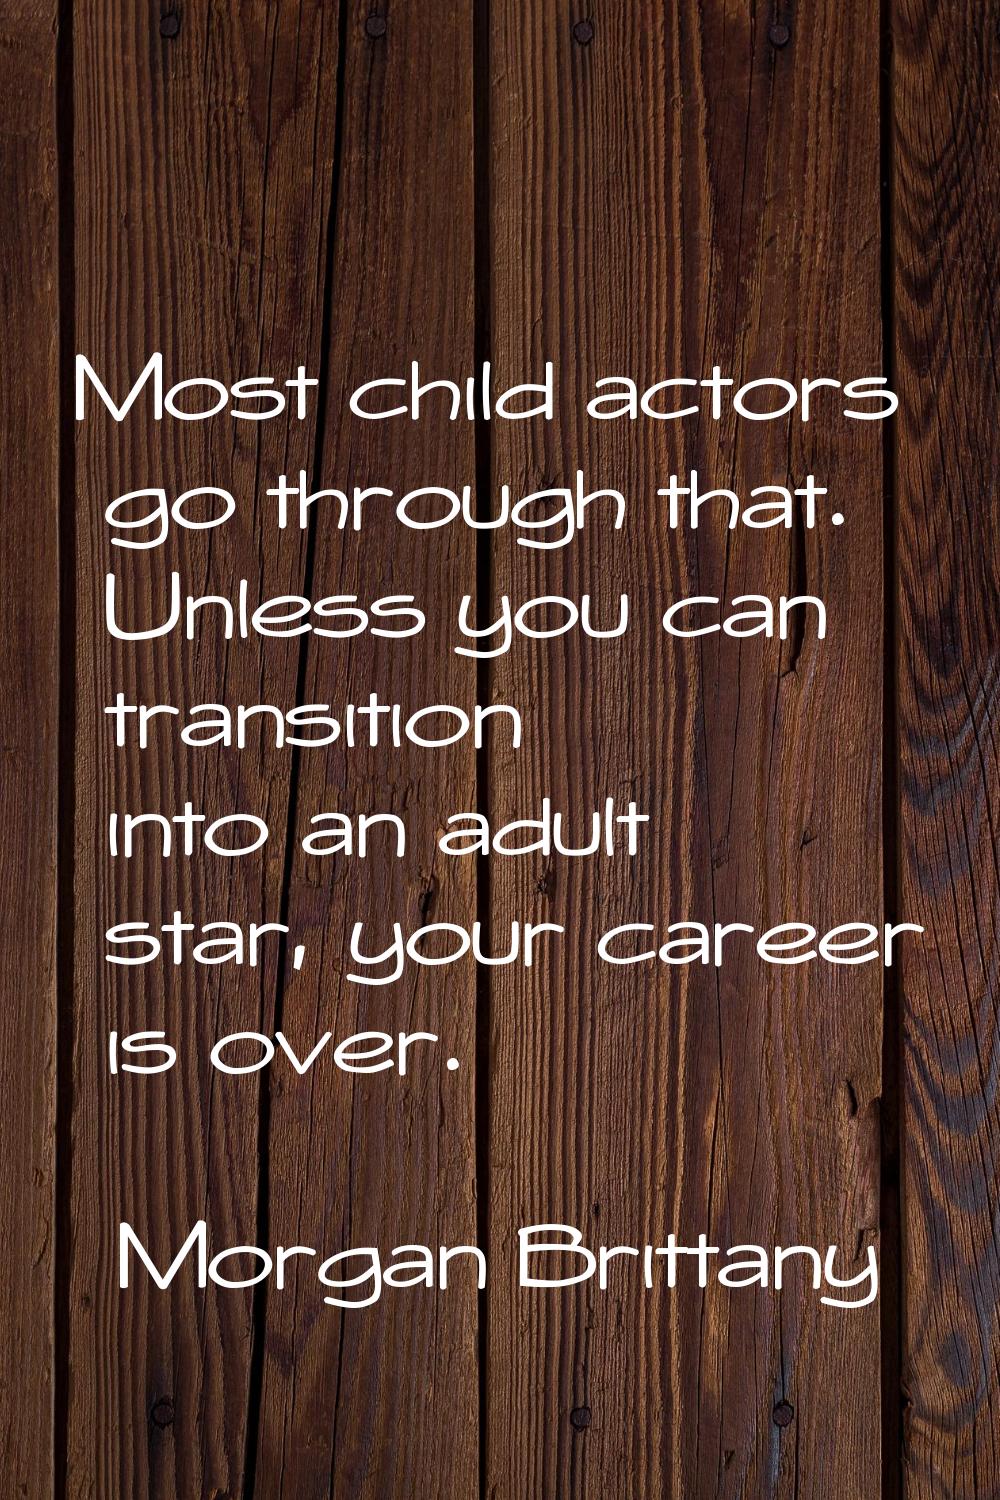 Most child actors go through that. Unless you can transition into an adult star, your career is ove